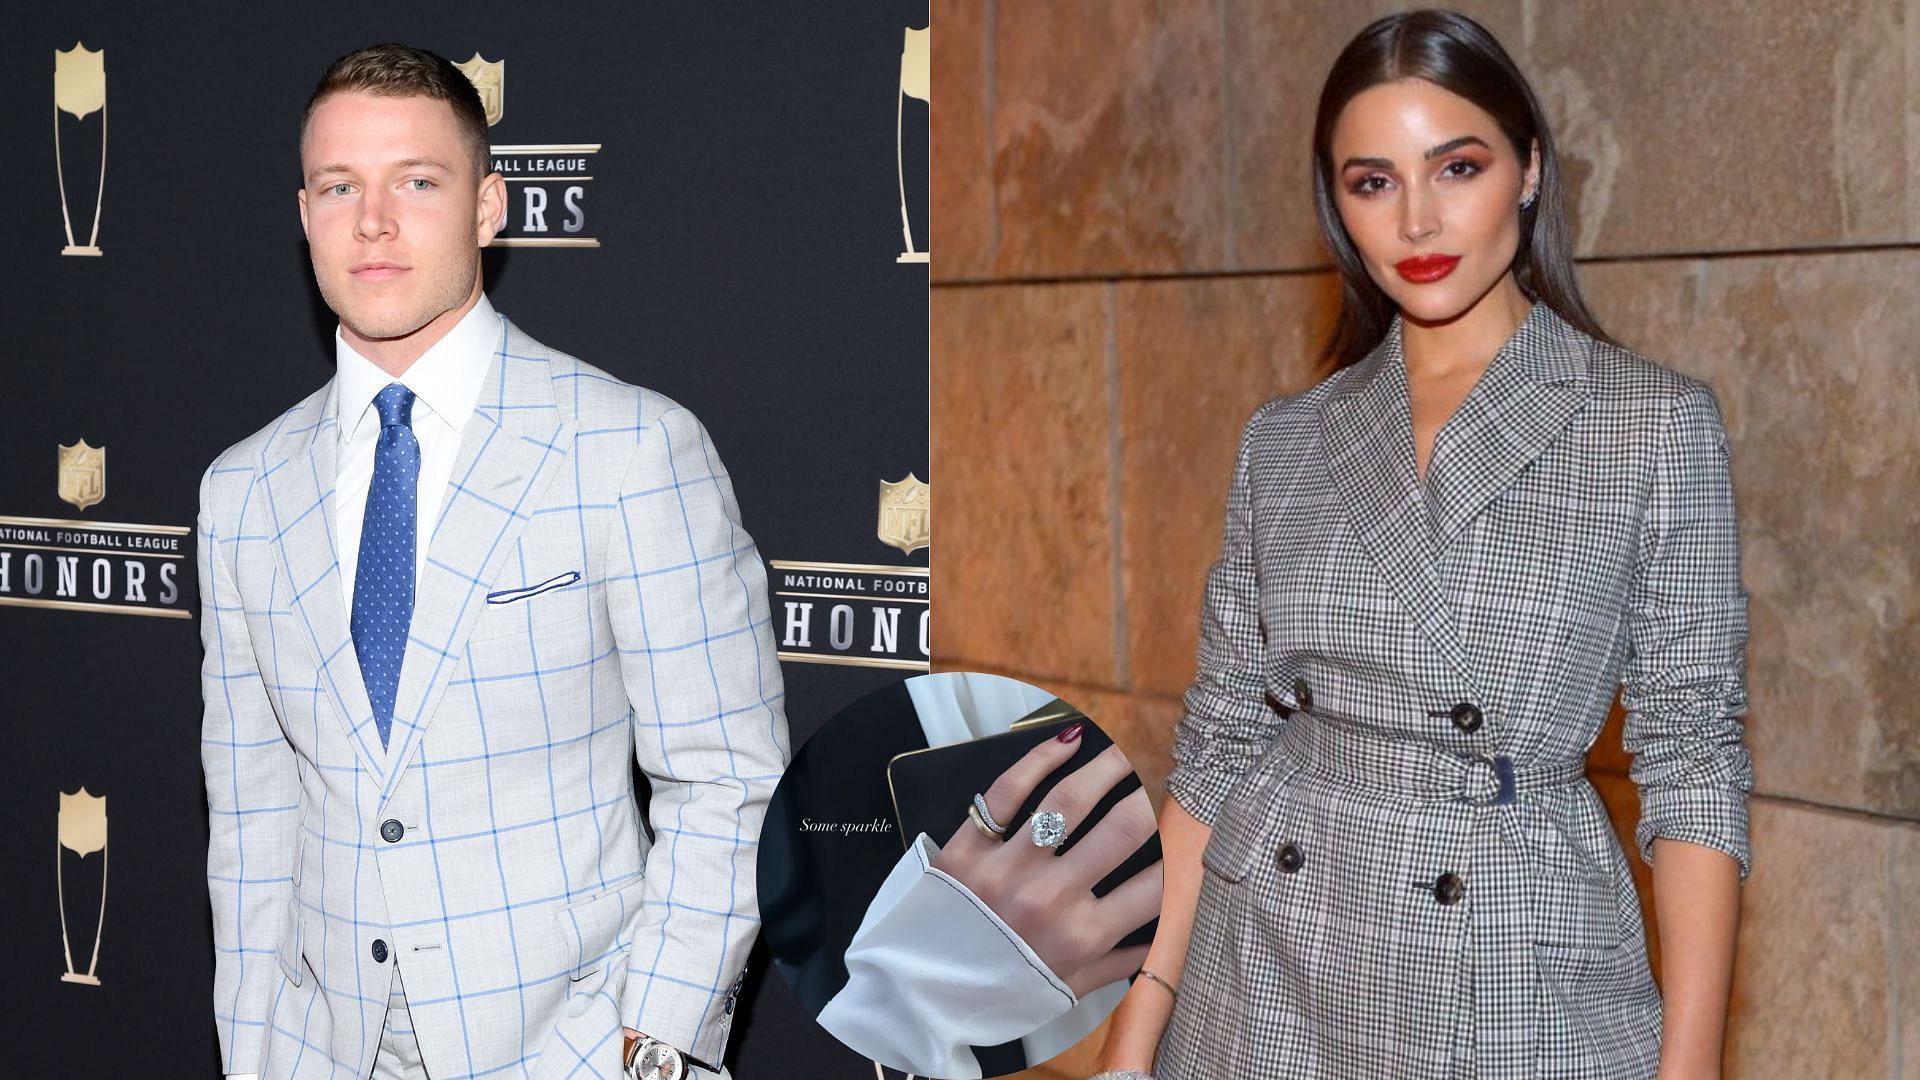 IN PHOTOS: Olivia Culpo glams it up for NFL Honors as Christian McCaffrey wins Offensive Player of the Year